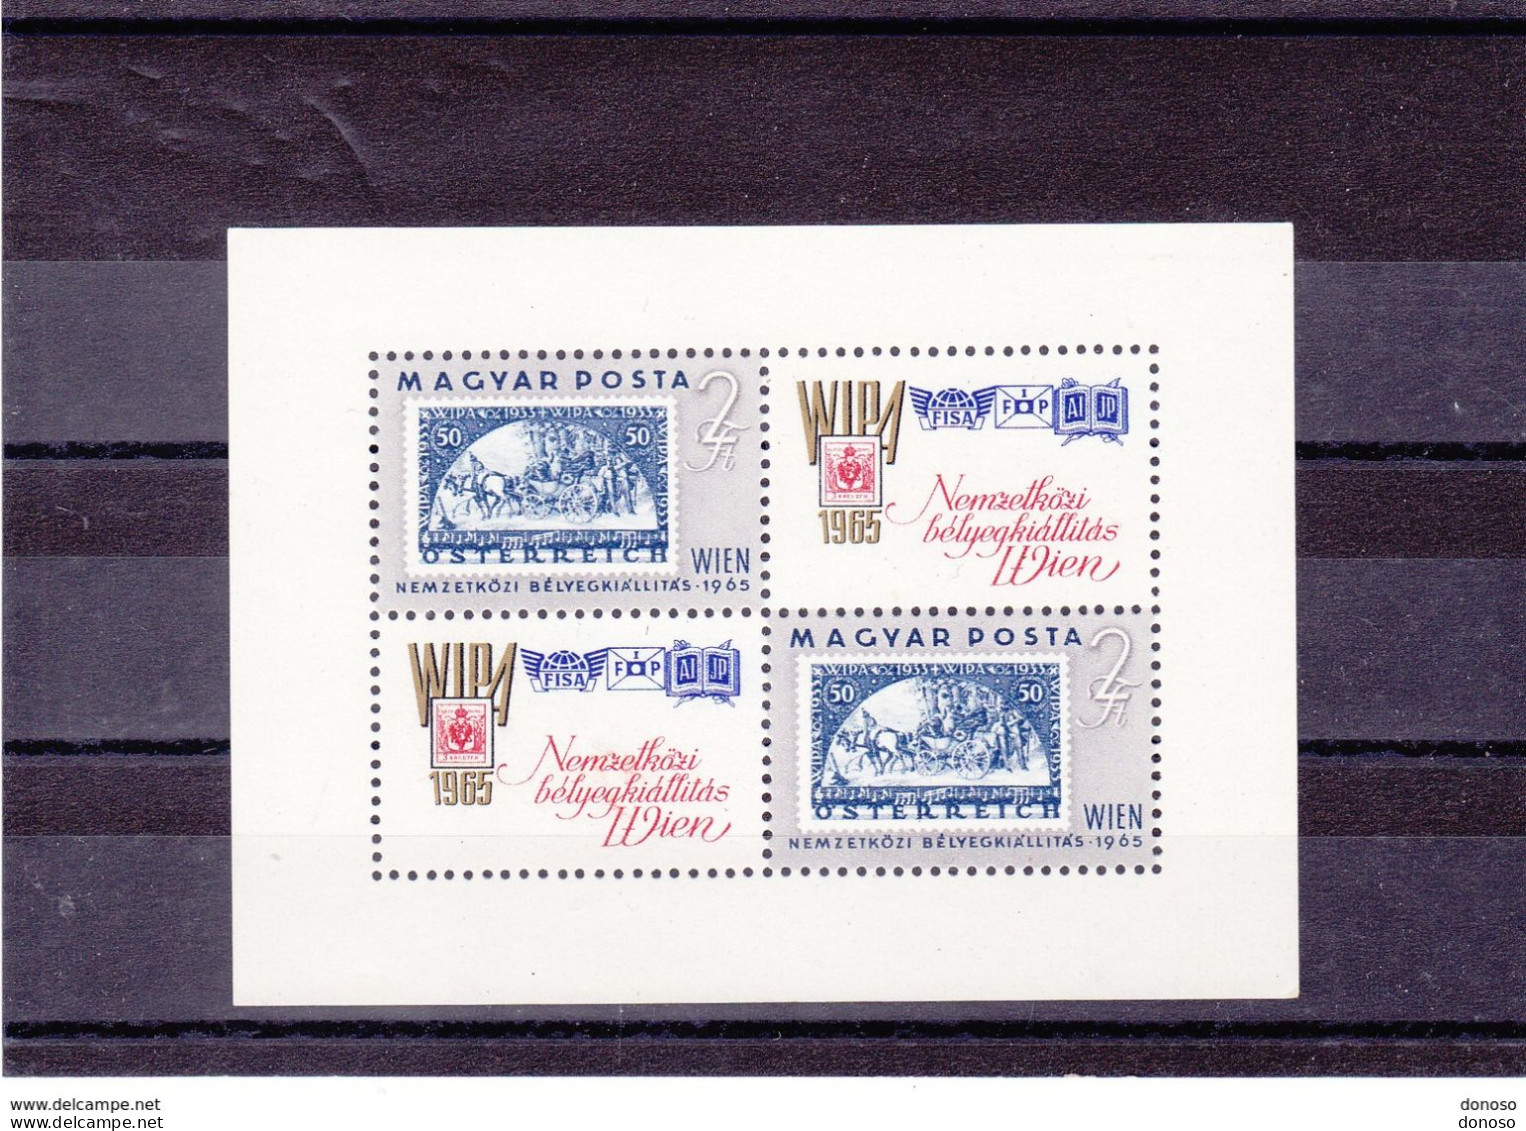 HONGRIE 1965 WIPA Timbres Su Timbres Yvert BF 53, Michel Block 47 NEUF** MNH Cote Yv 10 Euros - Hojas Bloque